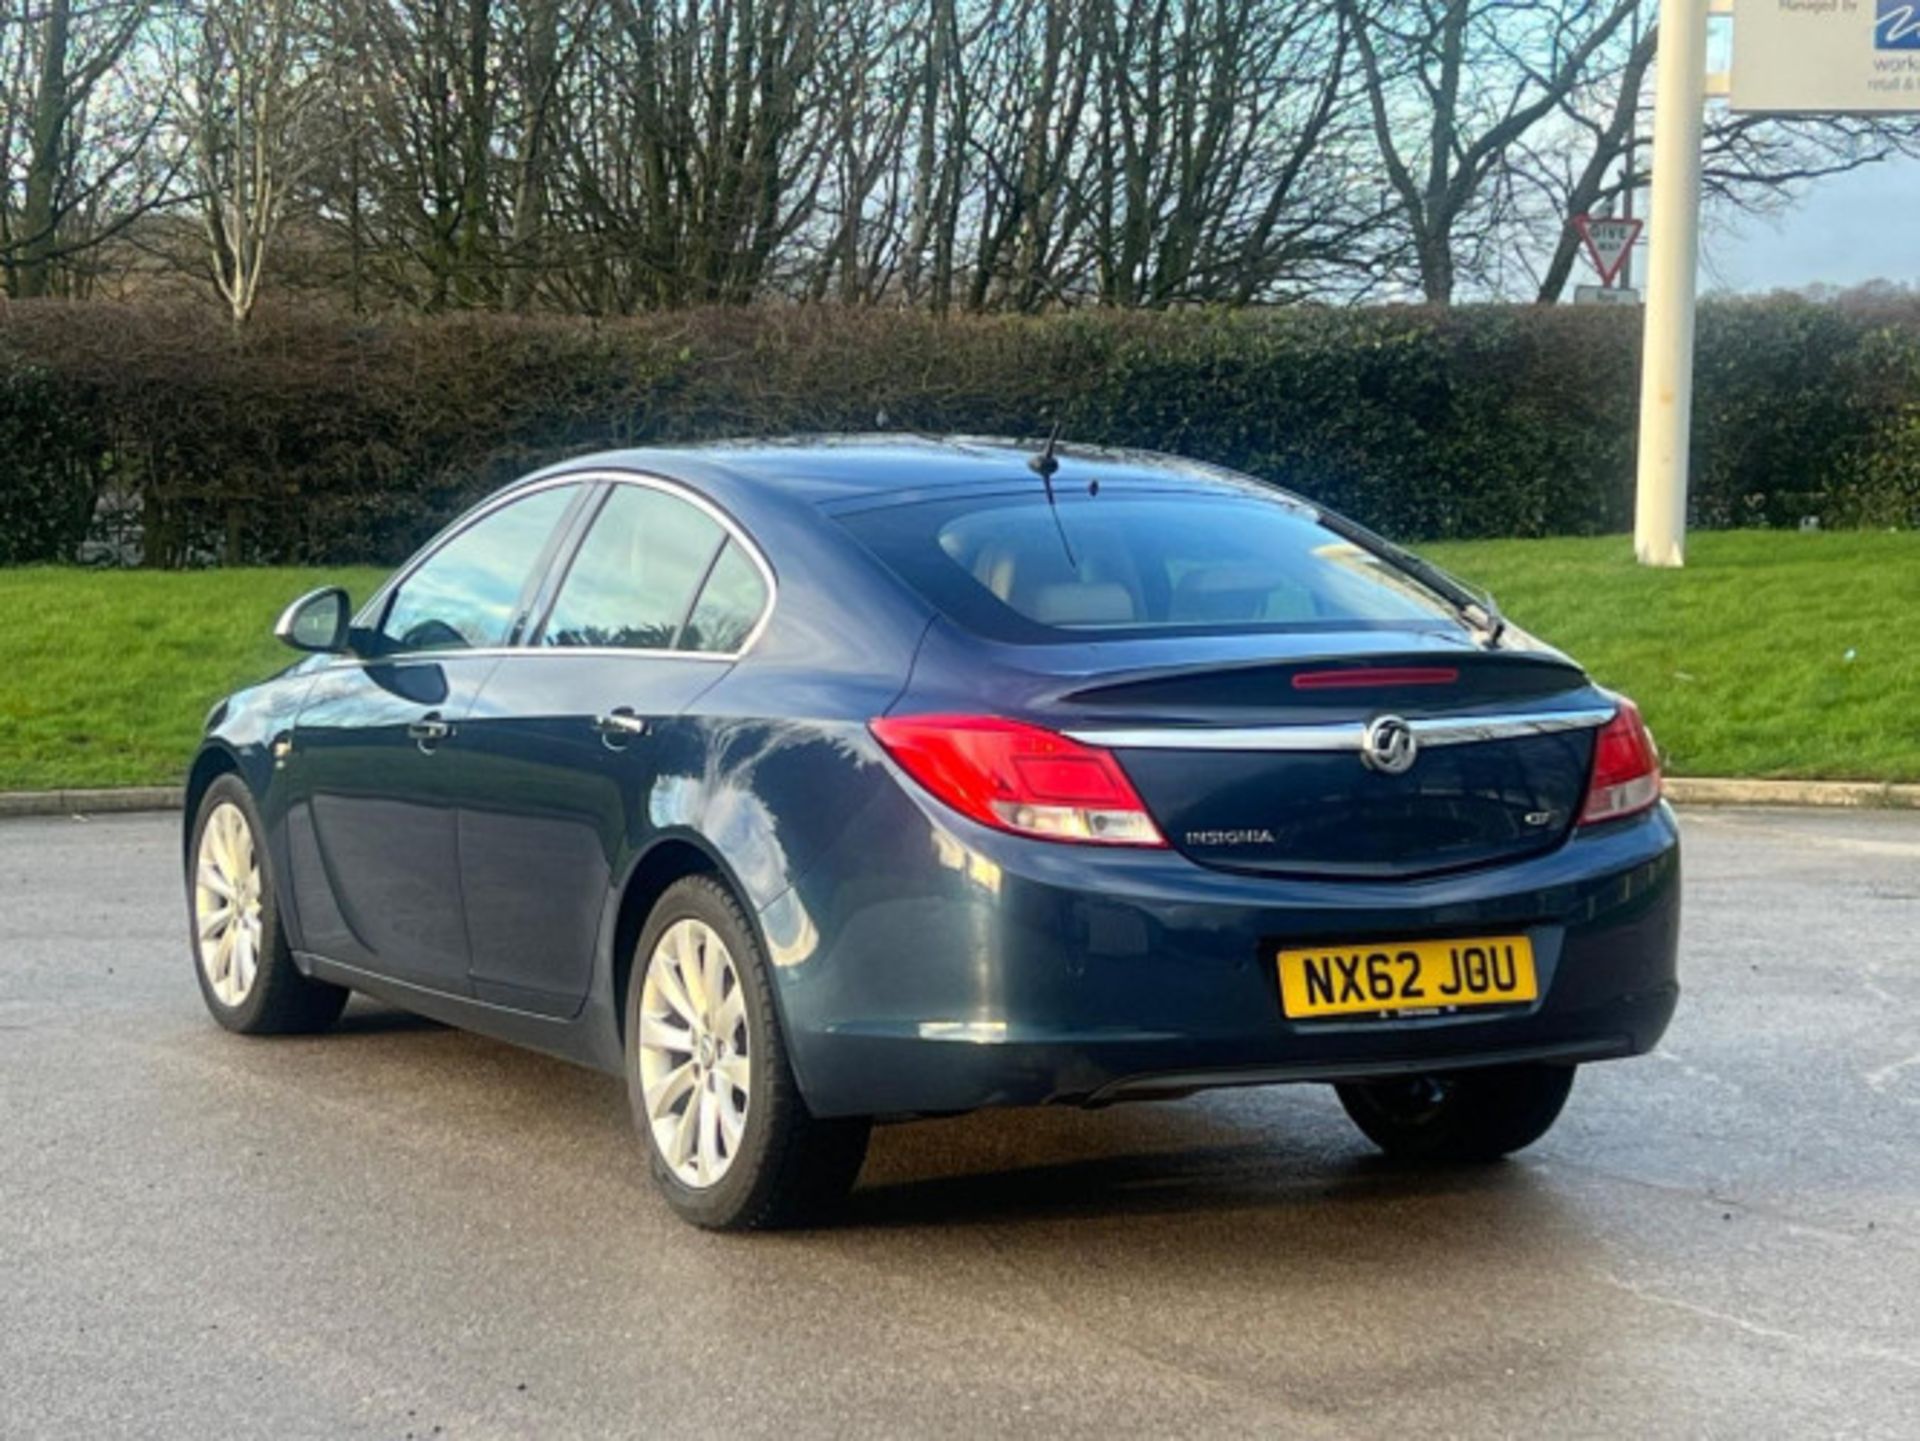 2012 VAUXHALL INSIGNIA 2.0 CDTI ELITE AUTO EURO 5 - DISCOVER EXCELLENCE >>--NO VAT ON HAMMER--<< - Image 75 of 79